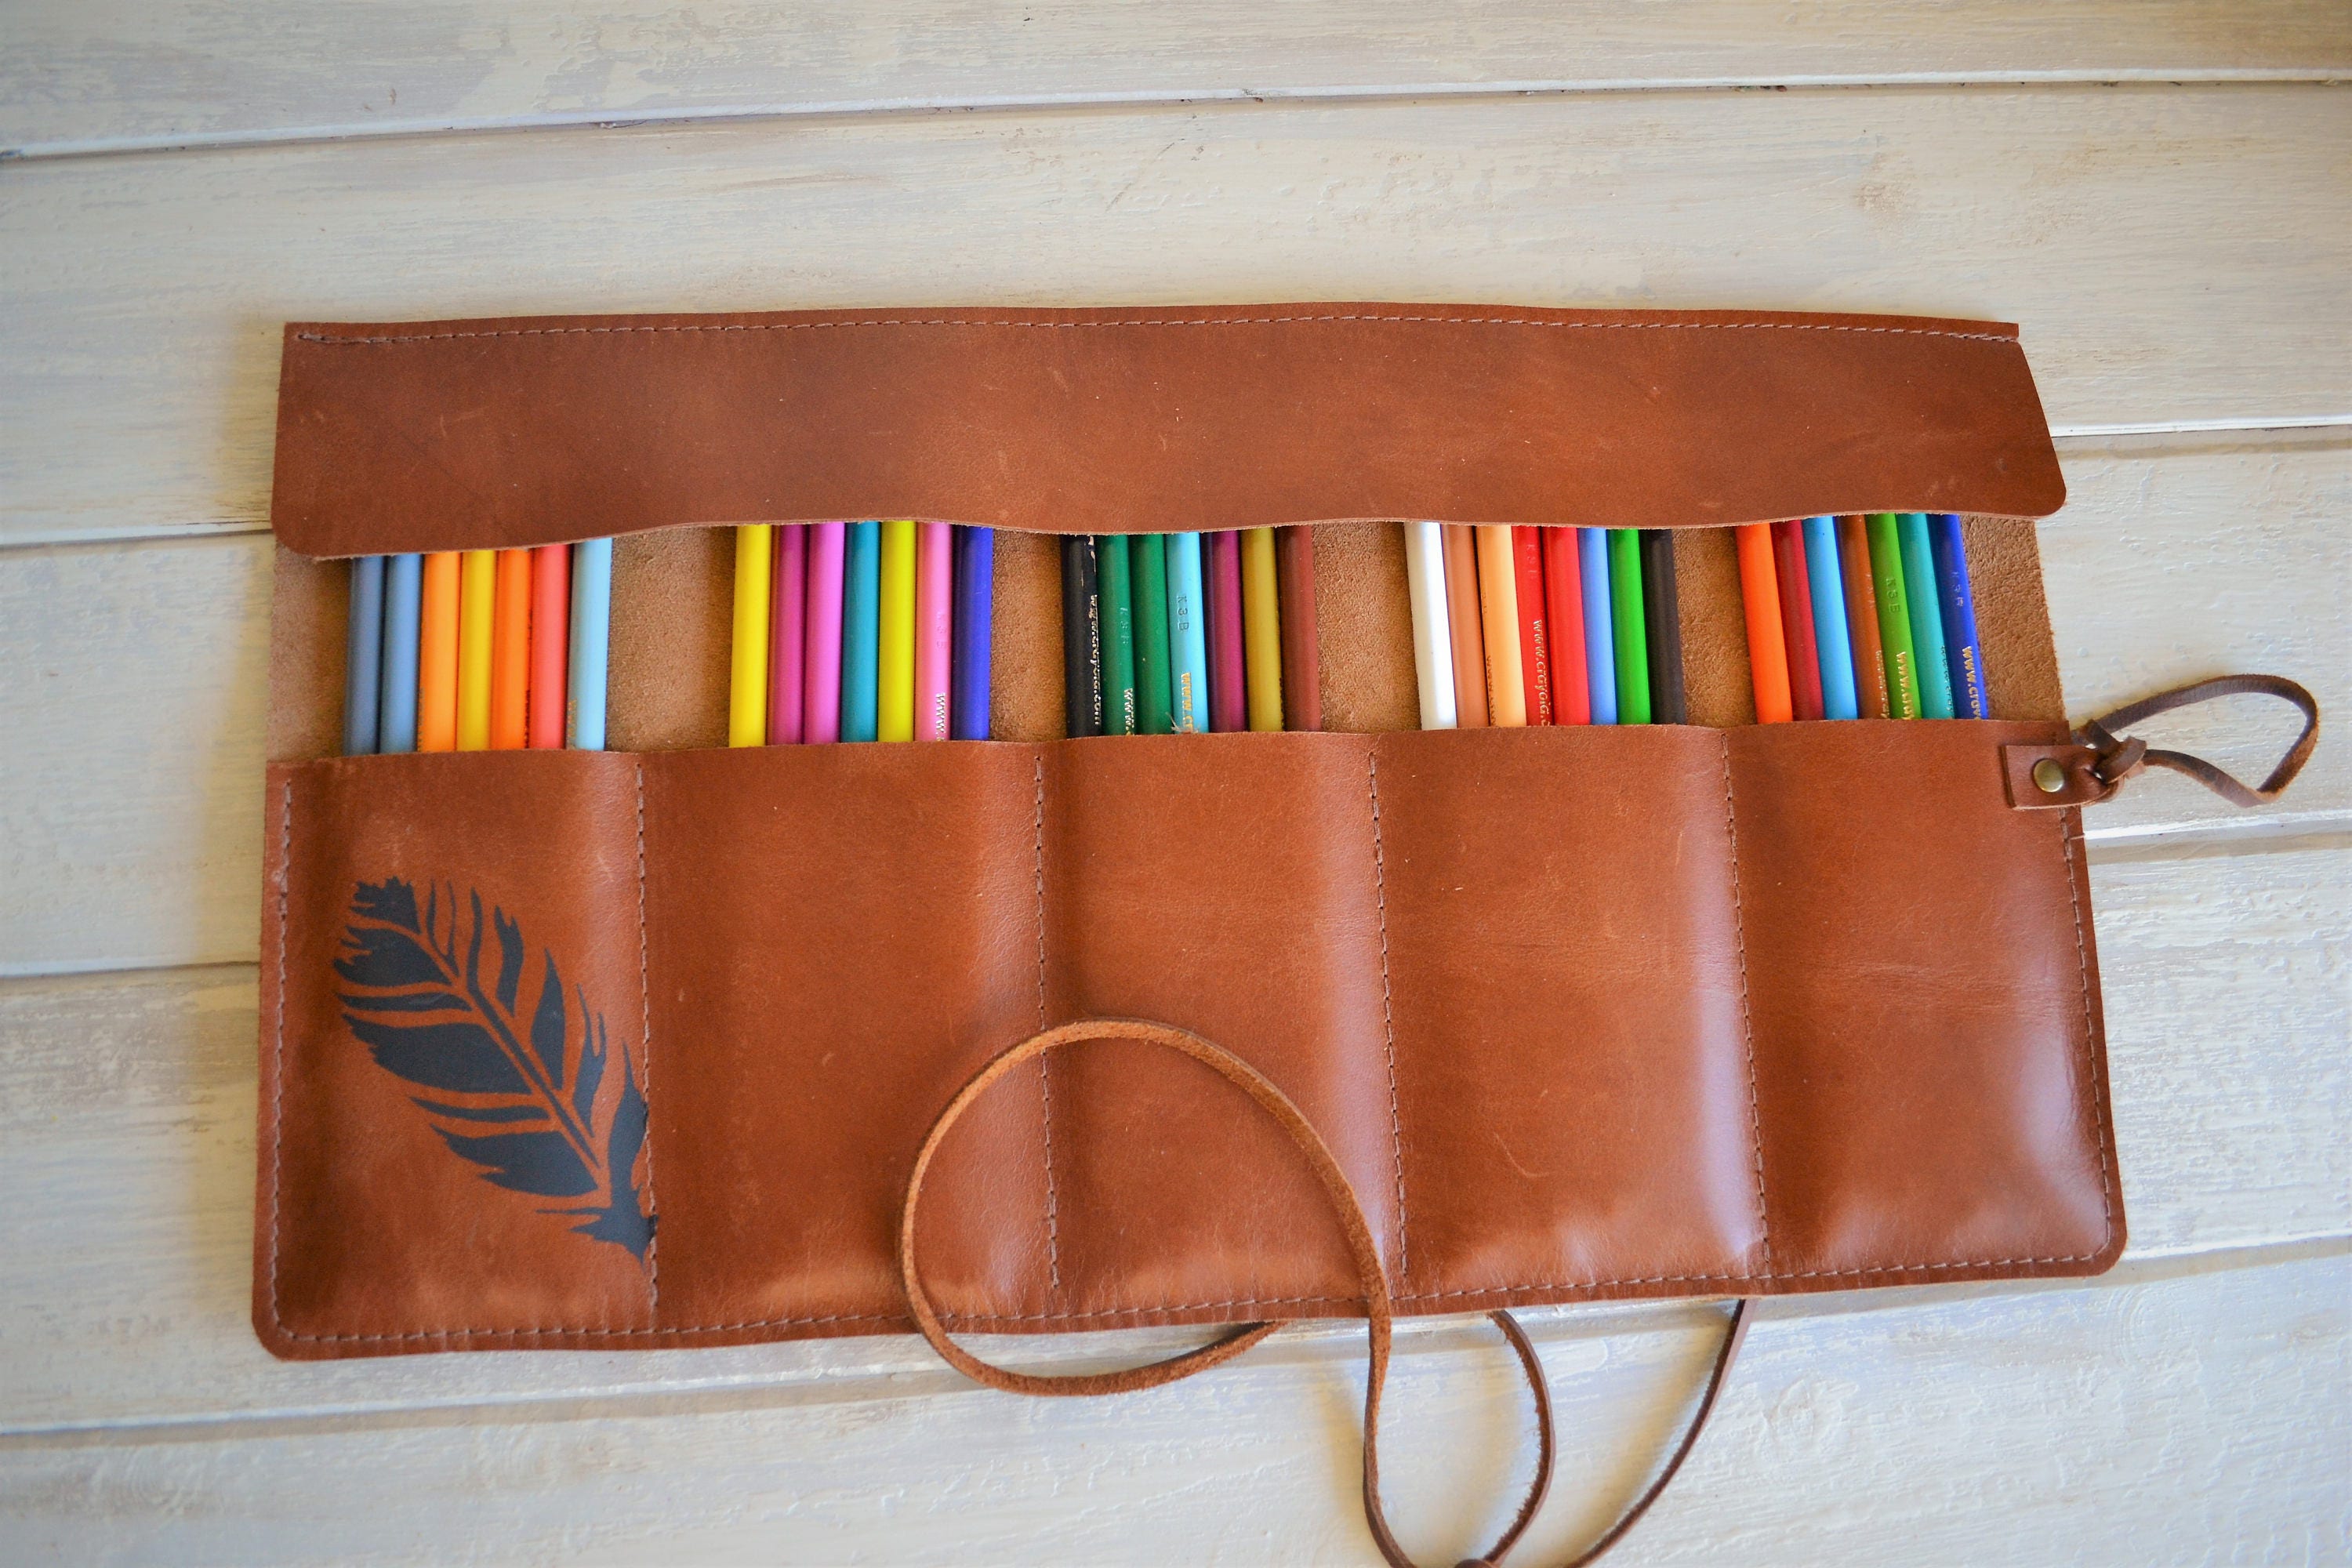 Personaliziered leather Pencil Roll, Pen Roll, Pencil Roll Up Case, Artist  pouch, Pencil Travel Case, Makeup brushes roll